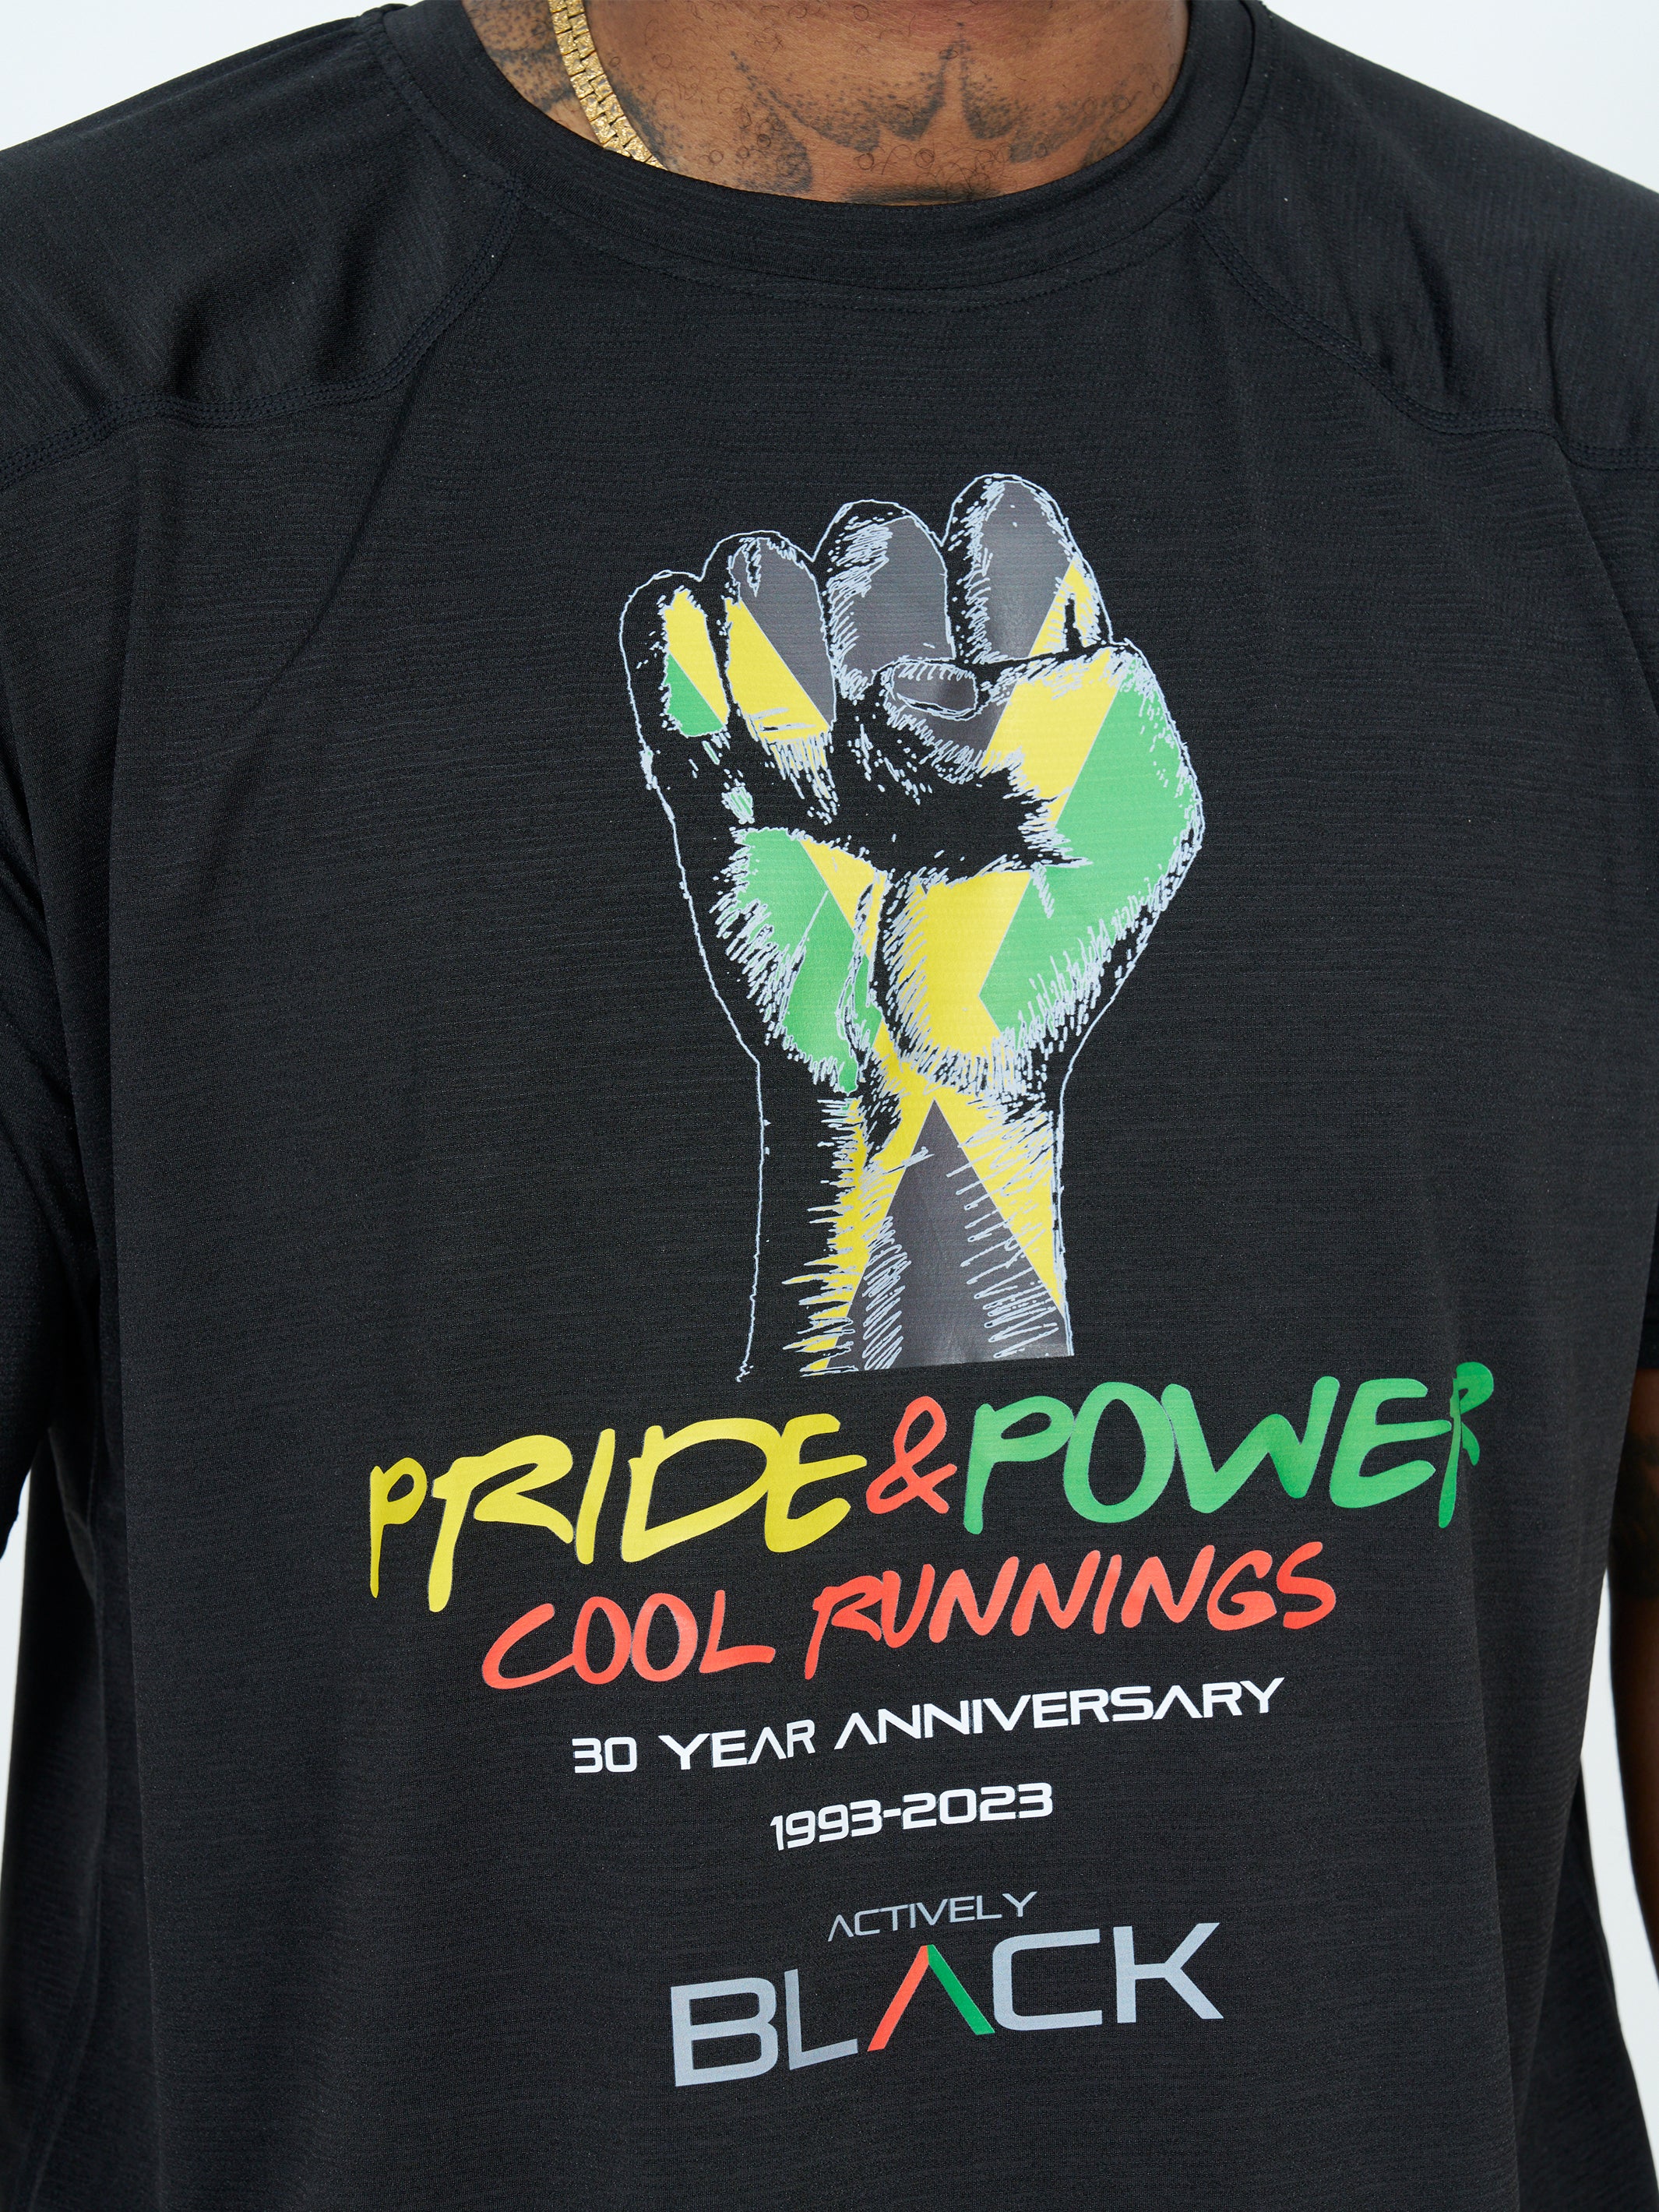 Actively Black Pride & Power Performance Shirt